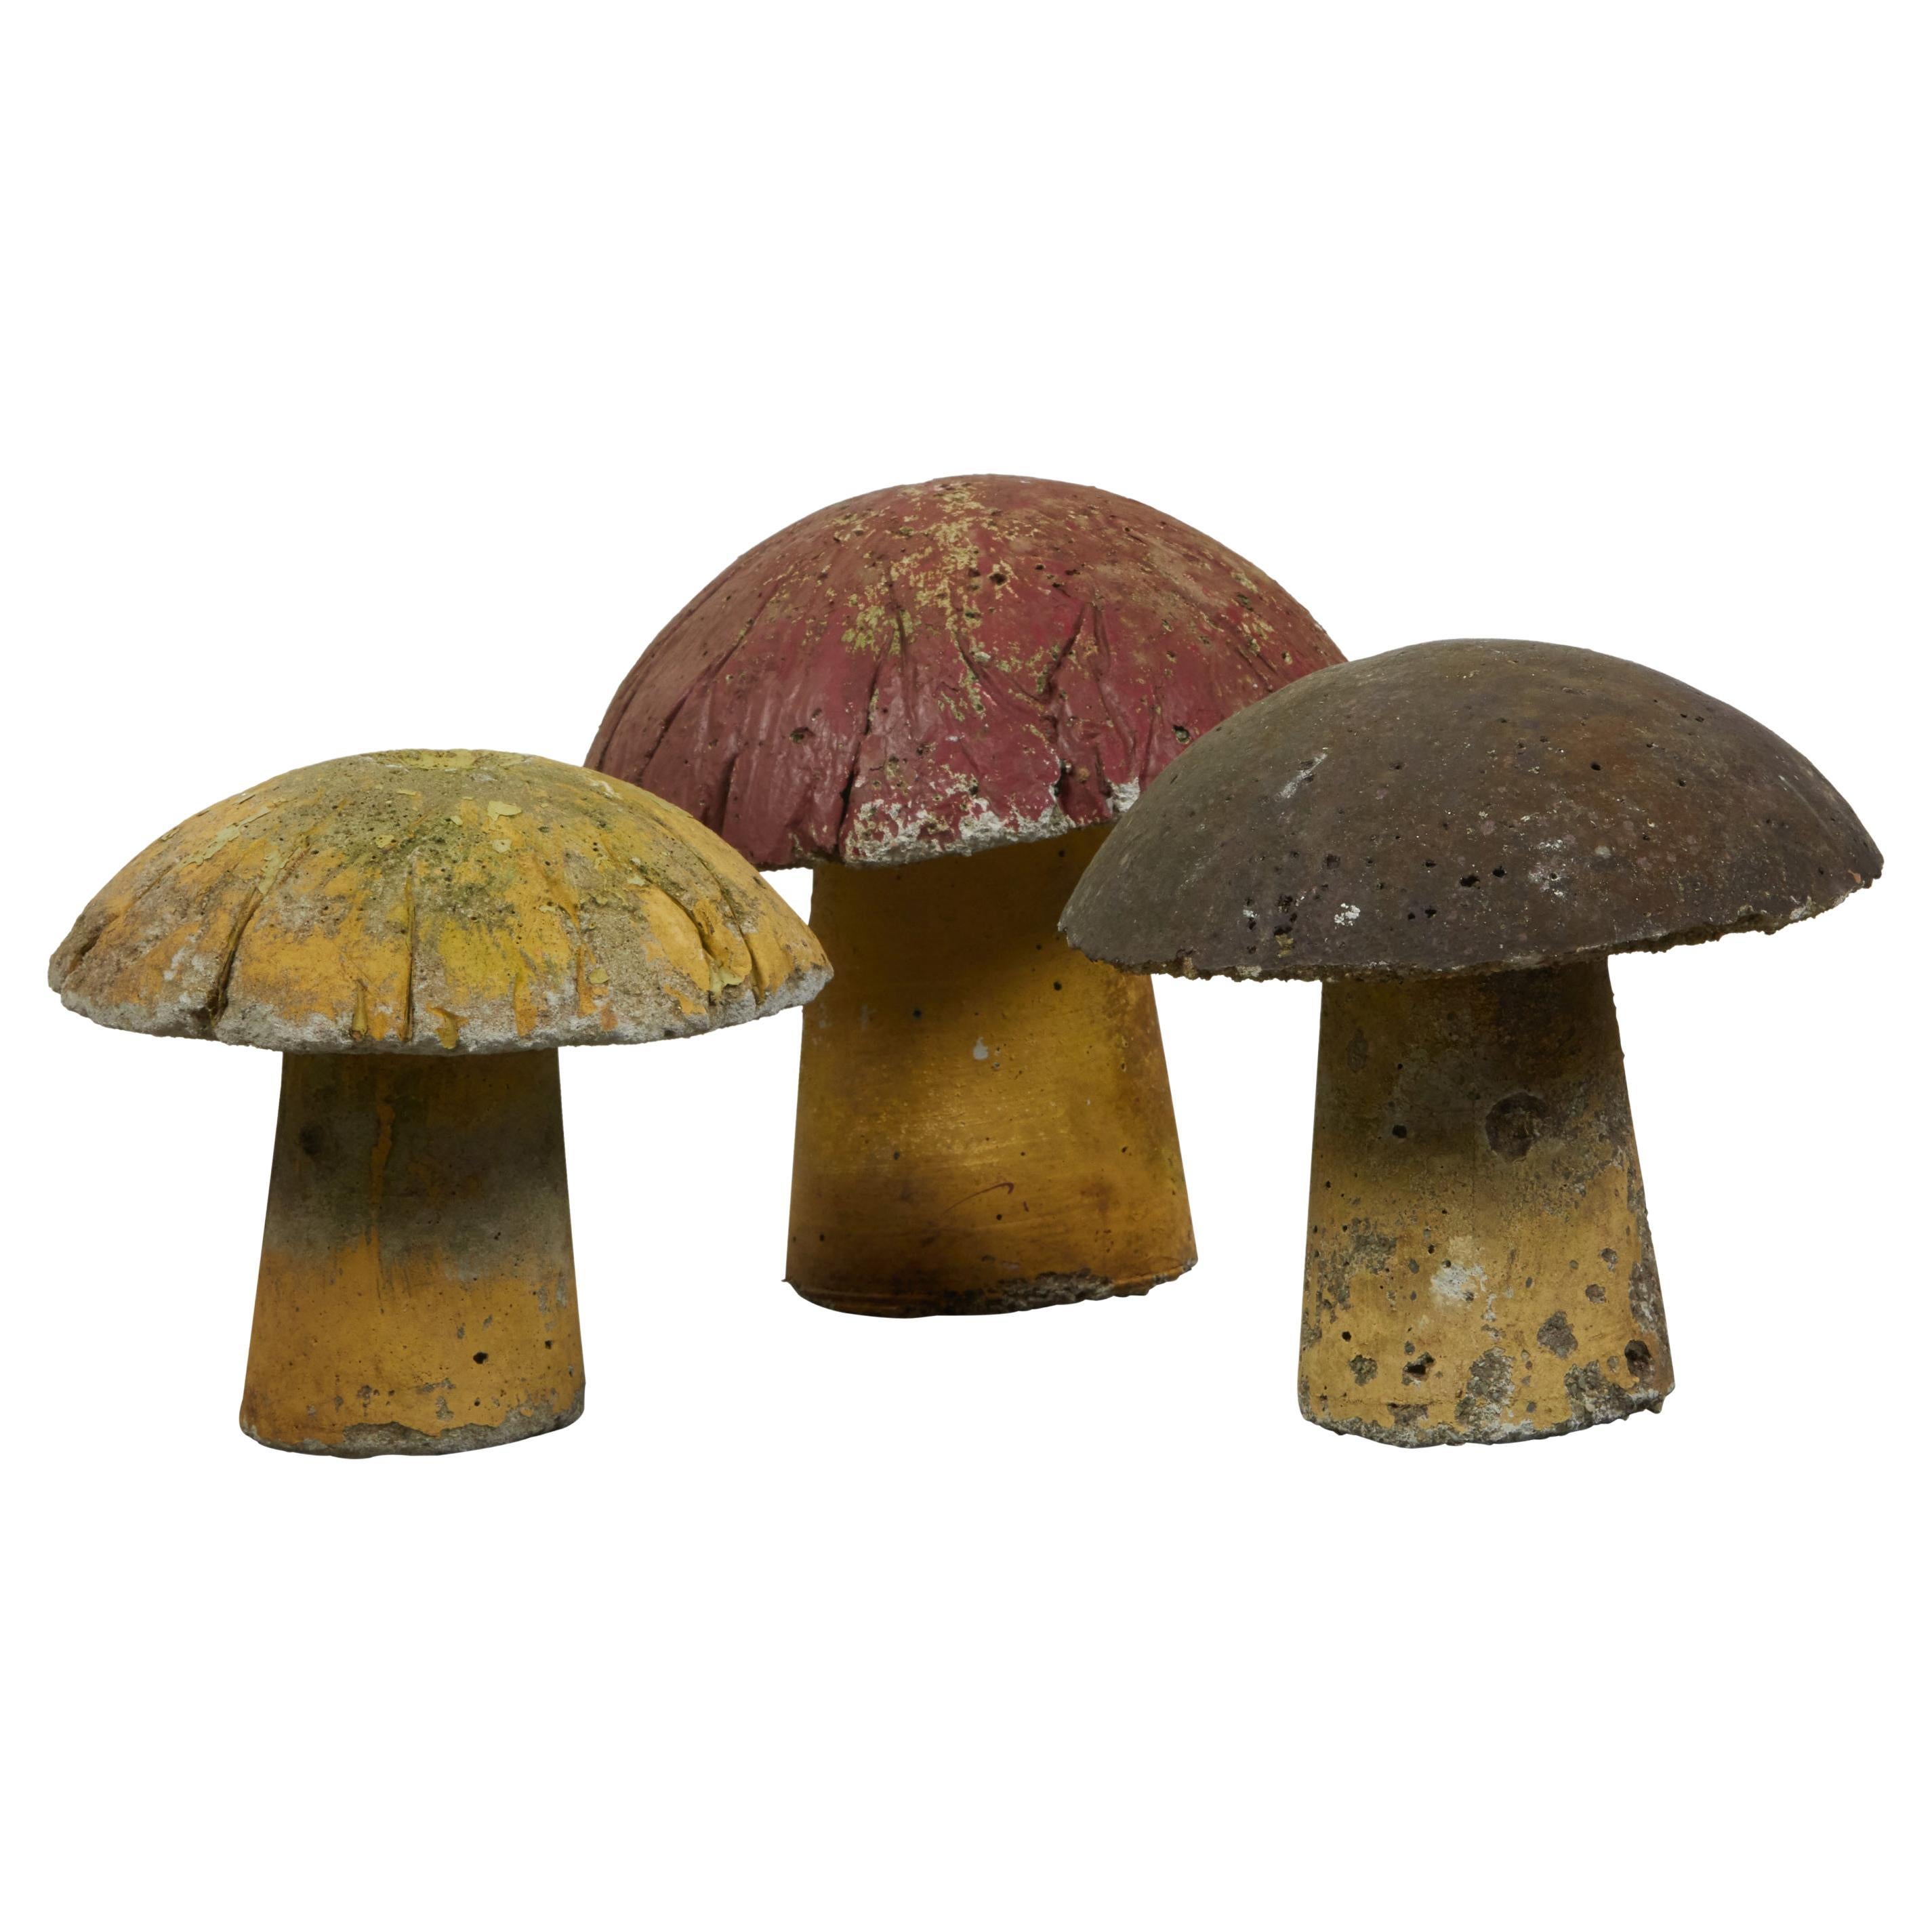 A set of three vintage American concrete mushrooms from the mid 20th century, with nicely worn patina. Made in the USA during the midcentury period, this set of three concrete mushrooms boasts a nicely weathered appearance with red, yellow and brown